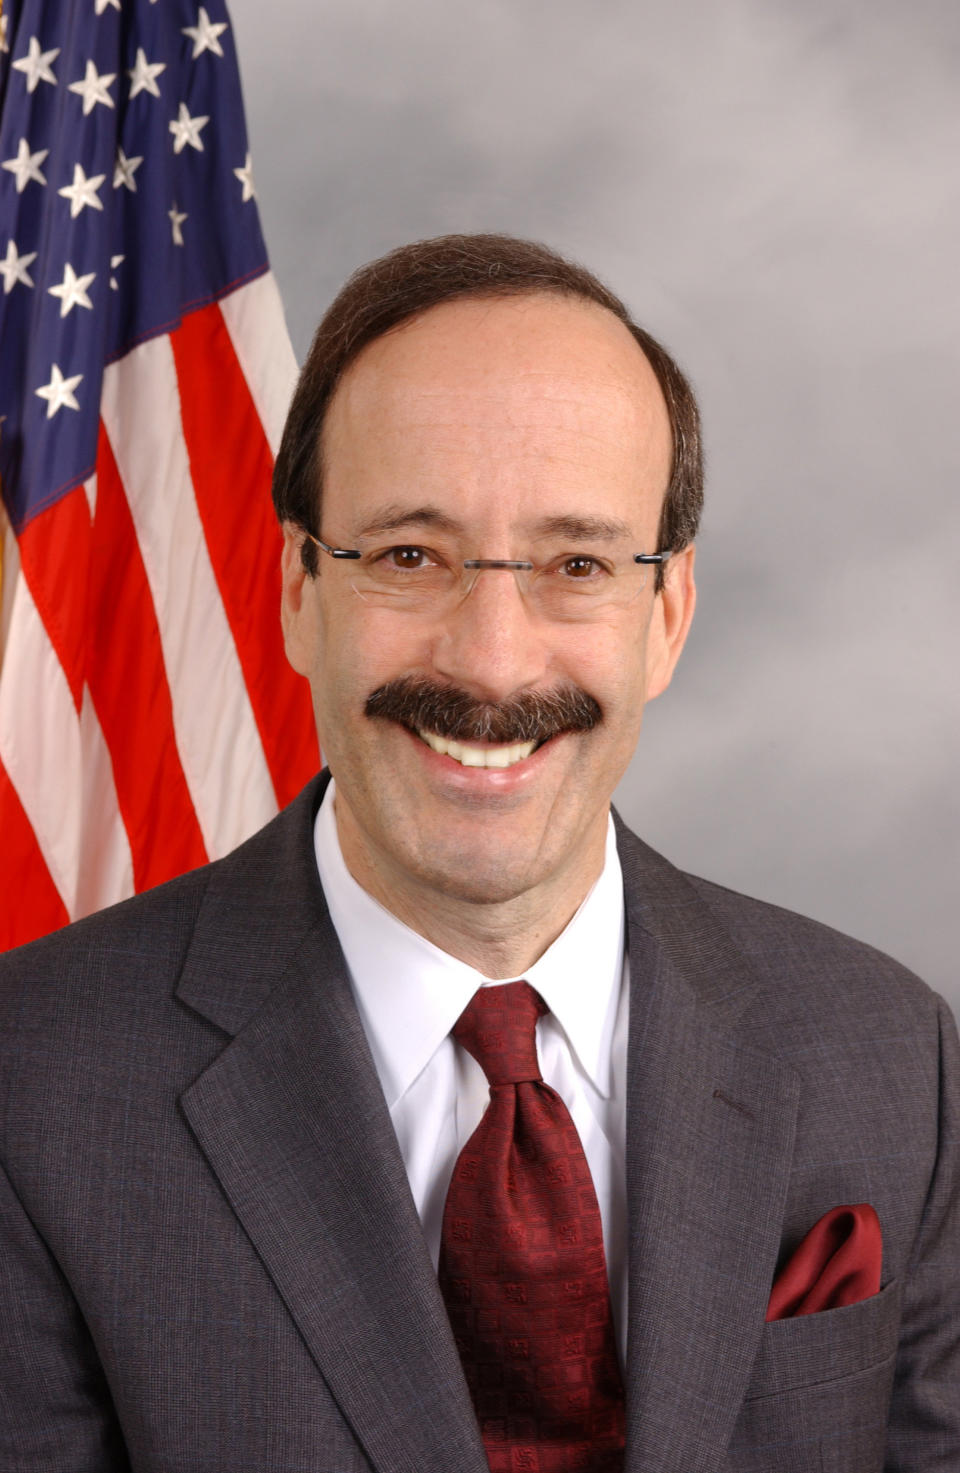 Rep. Engel has donned the same mustache since he was first elected to Congress in the early 1990s, making his facial hair the most reliable and recognizable in the House. 